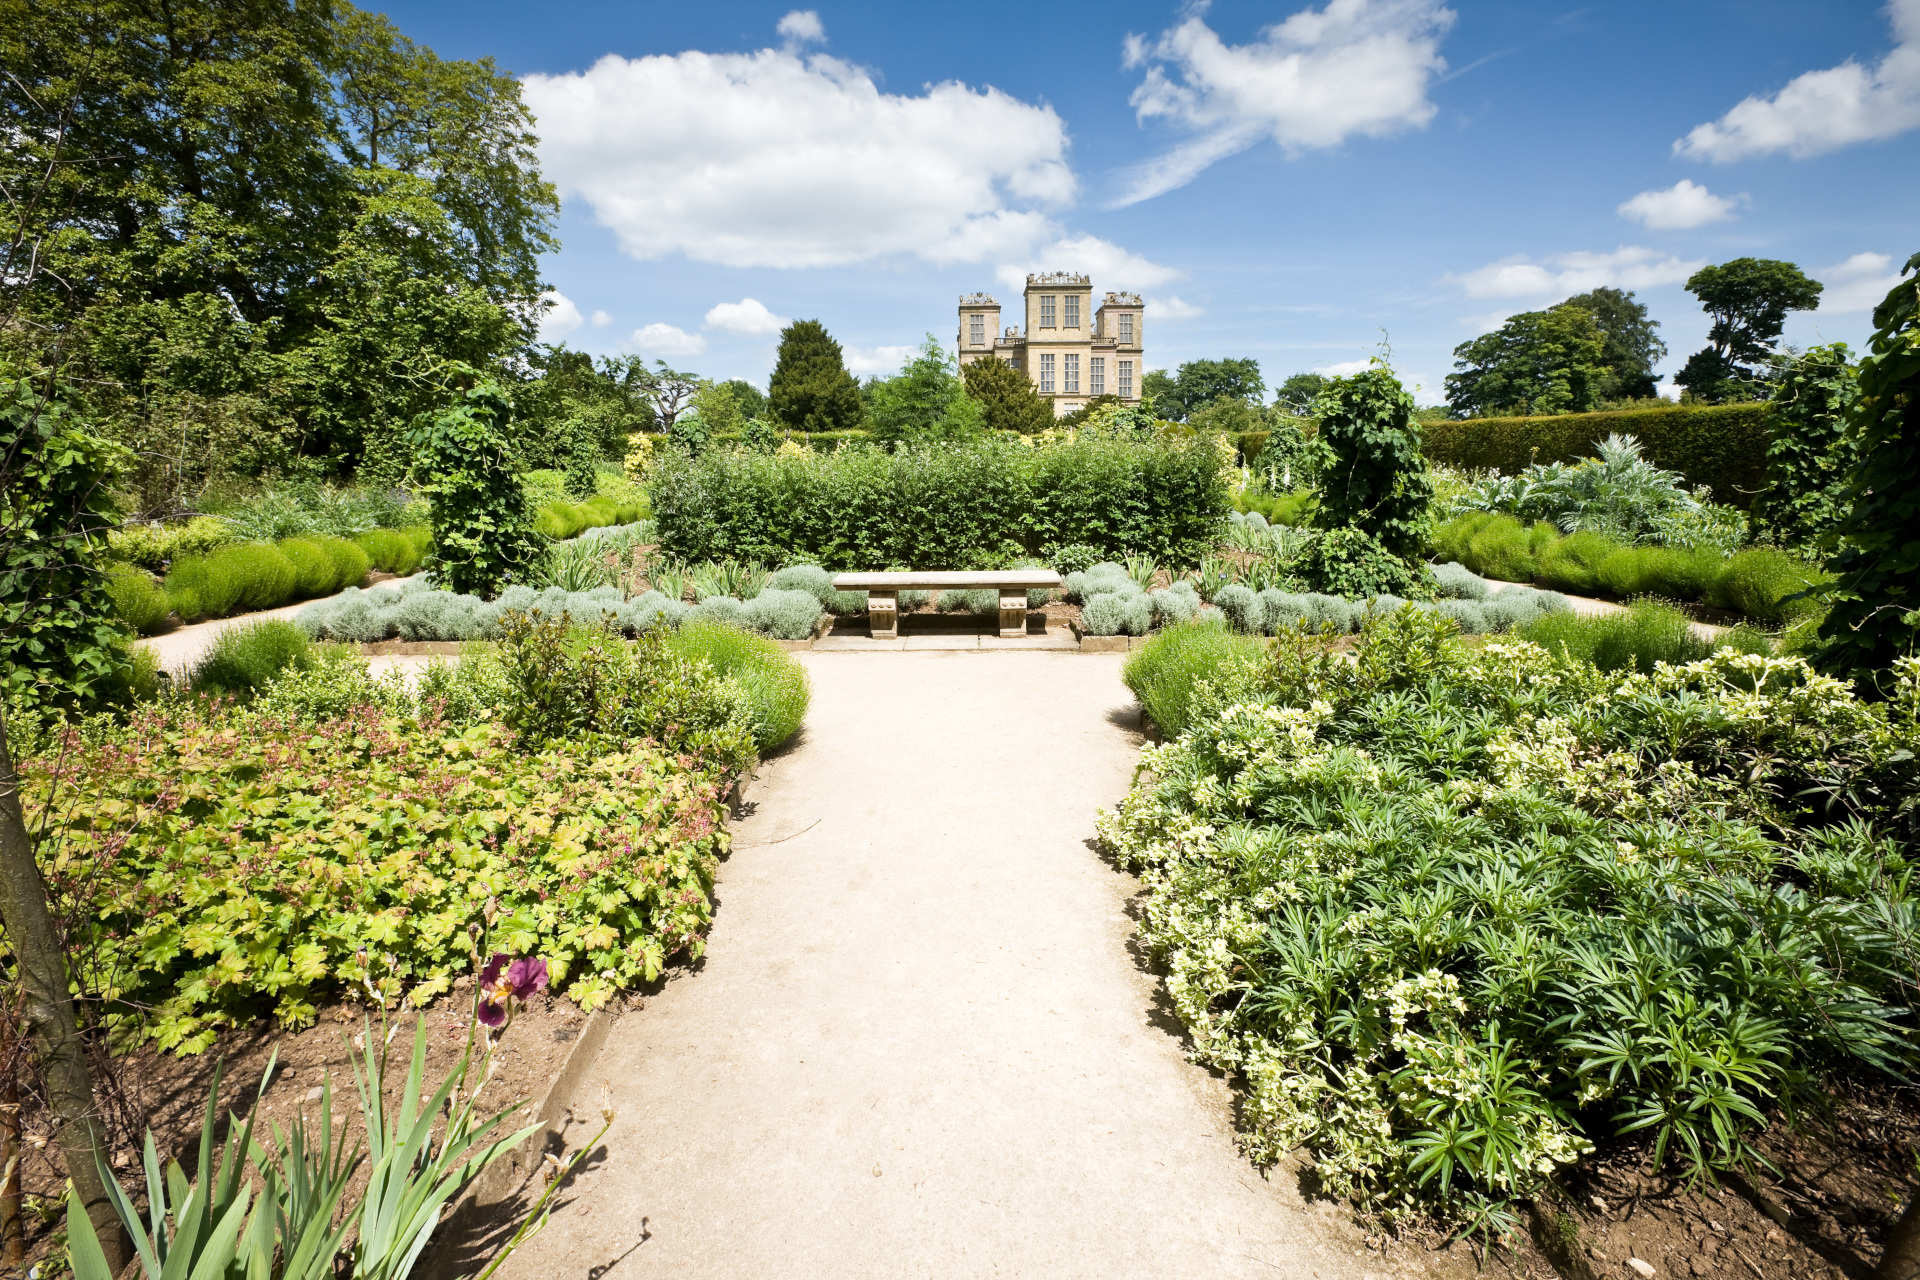 Garden at Hardwick Hall at Chesterfield in Derbyshire, England